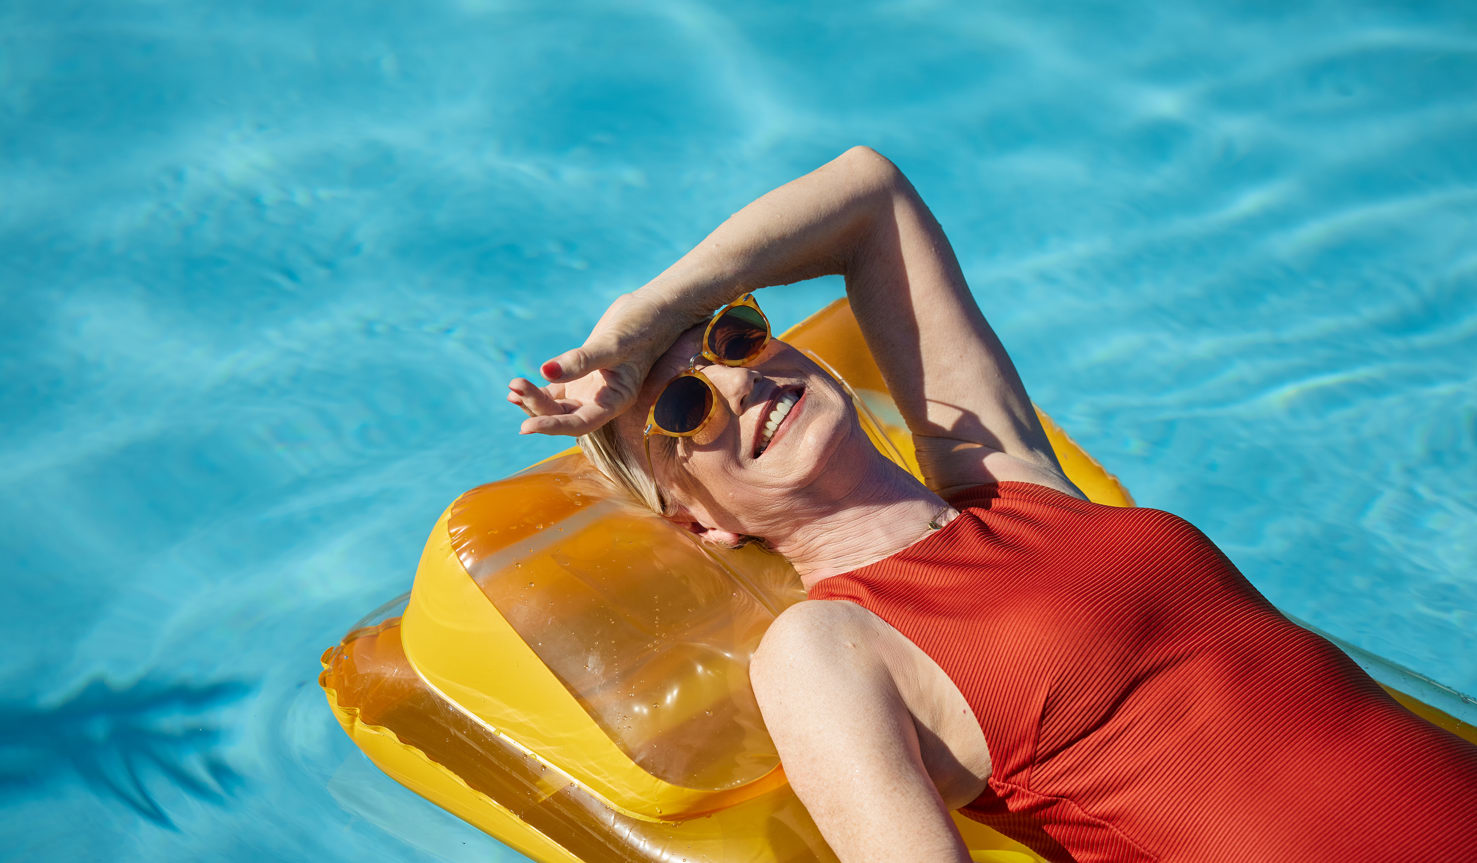 A woman in his sixties lounges in a blue pool on a yellow inflatable sun lounger whilst wearing a red one piece swimsuit and yellow sunglasses.